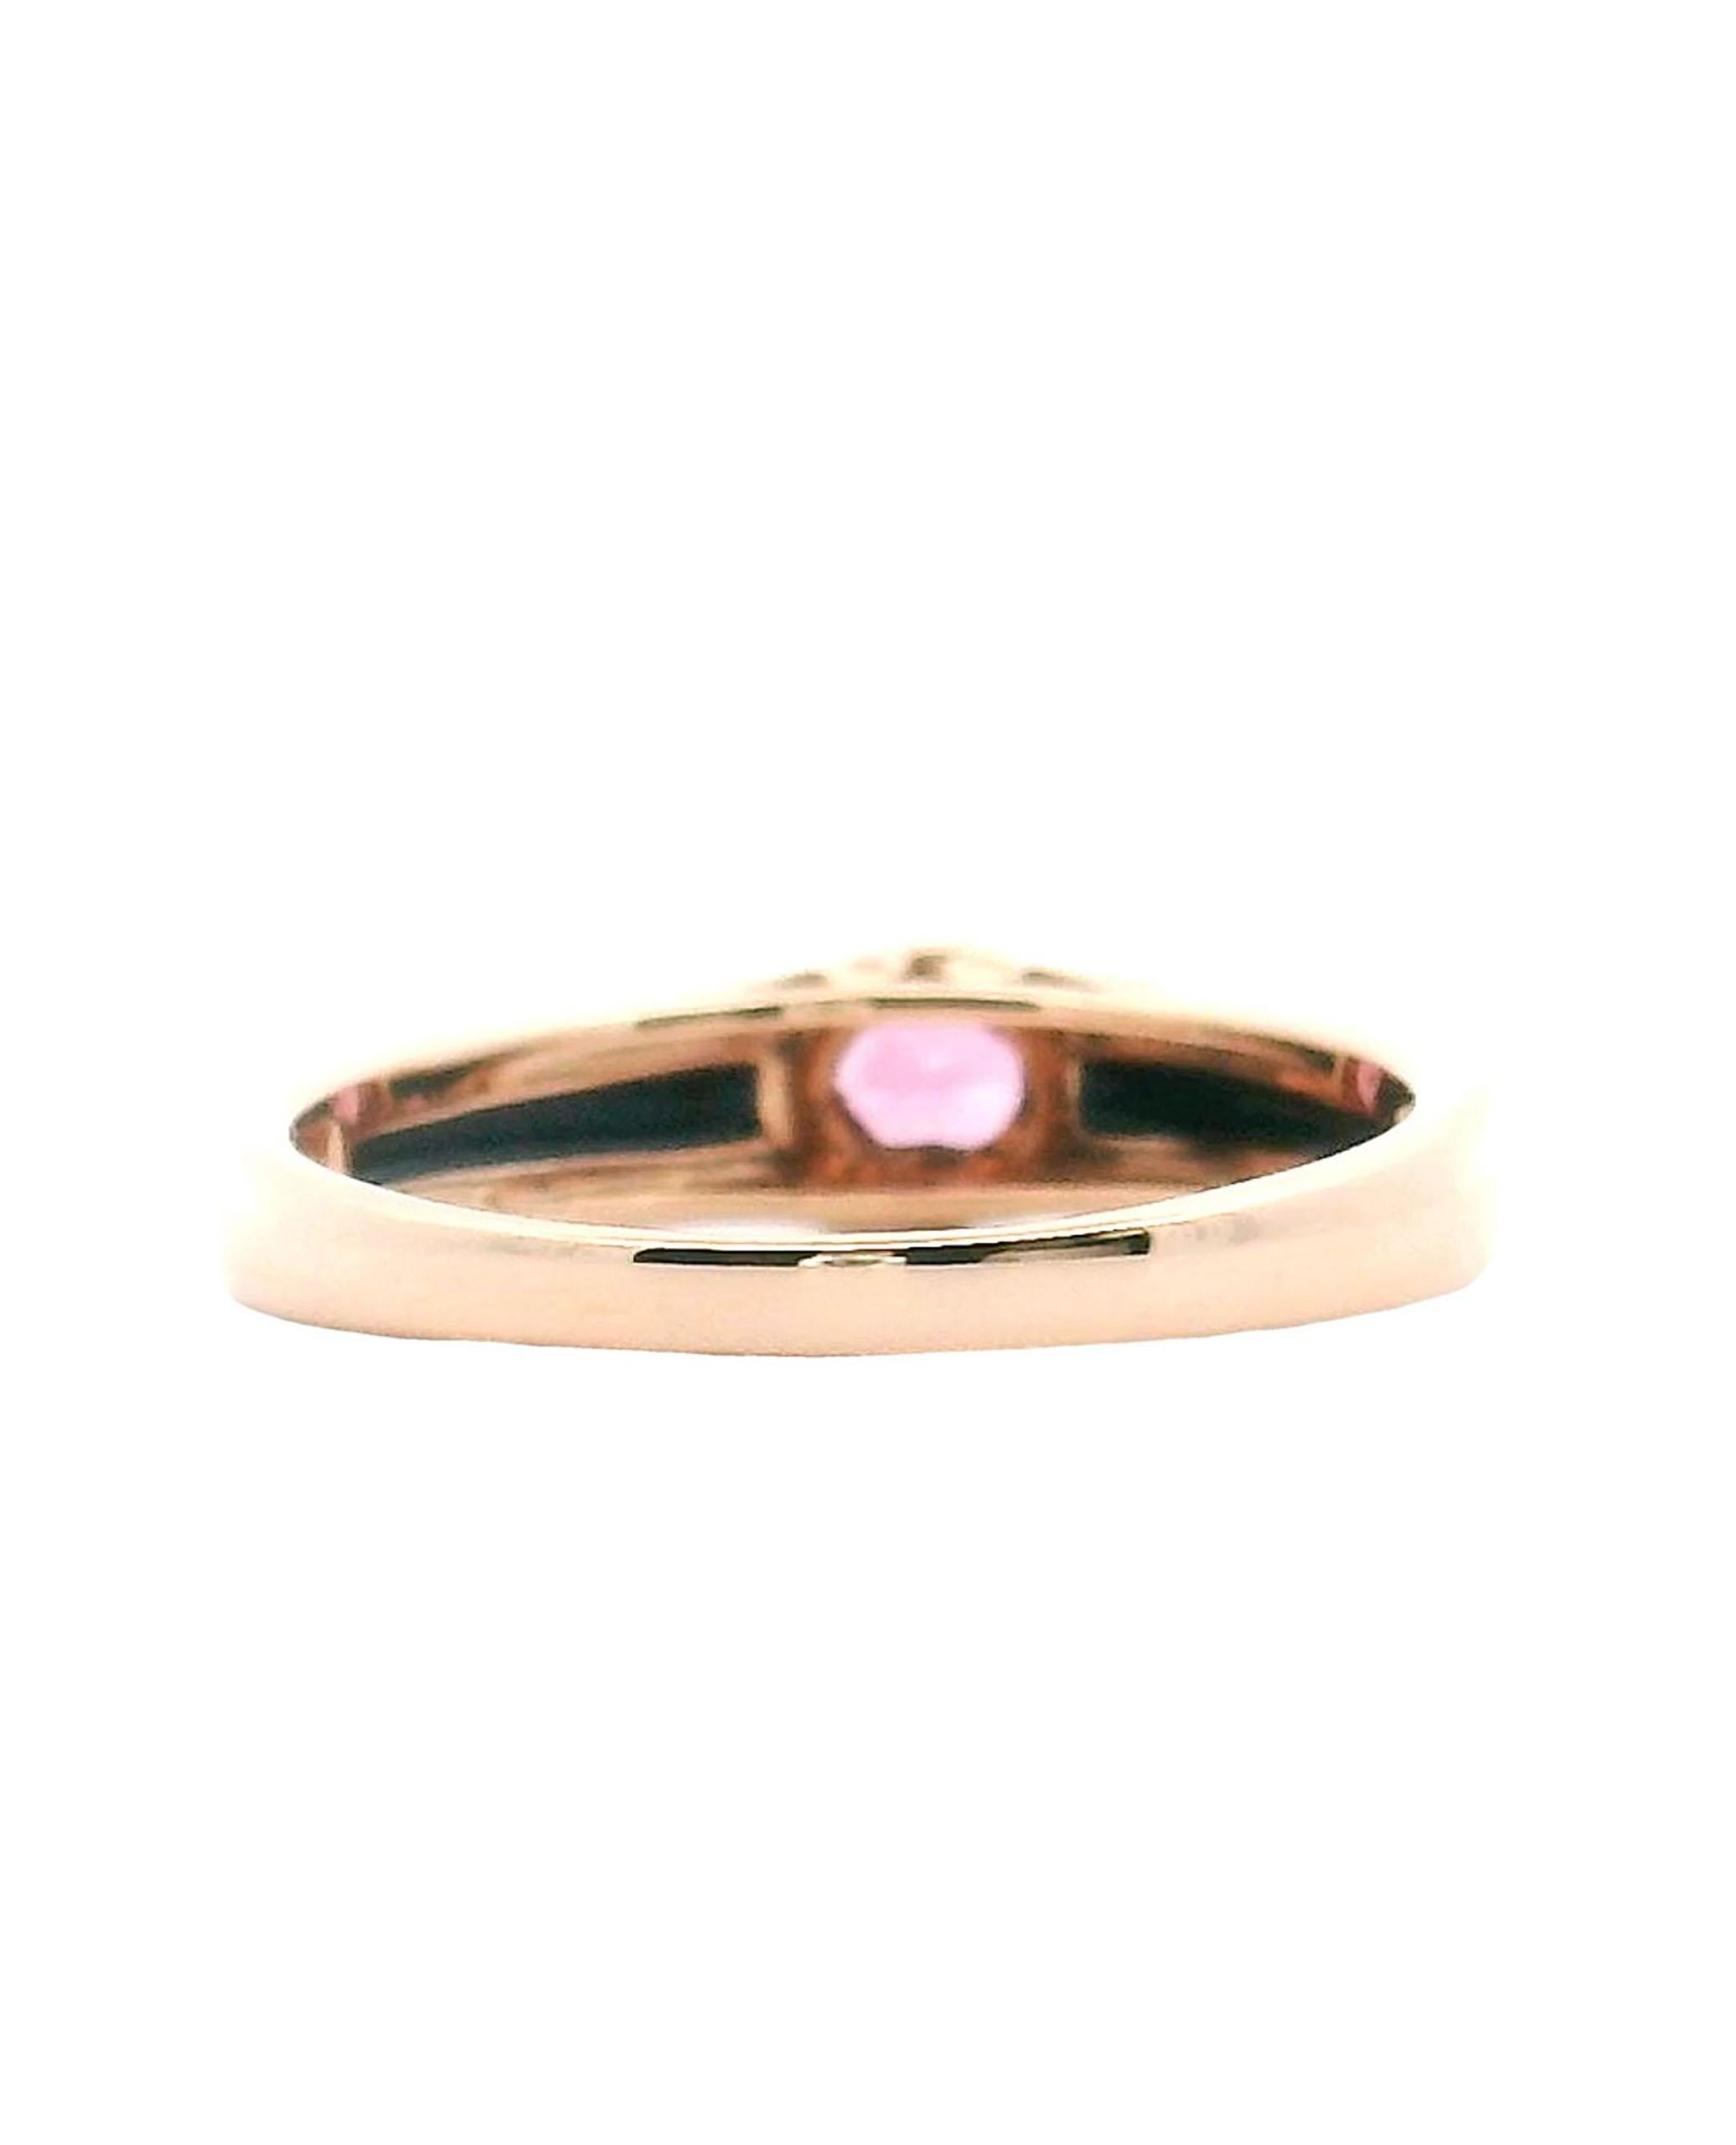 Contemporary 14K Rose Gold Ring with Pink Tourmaline and Black Enamel For Sale